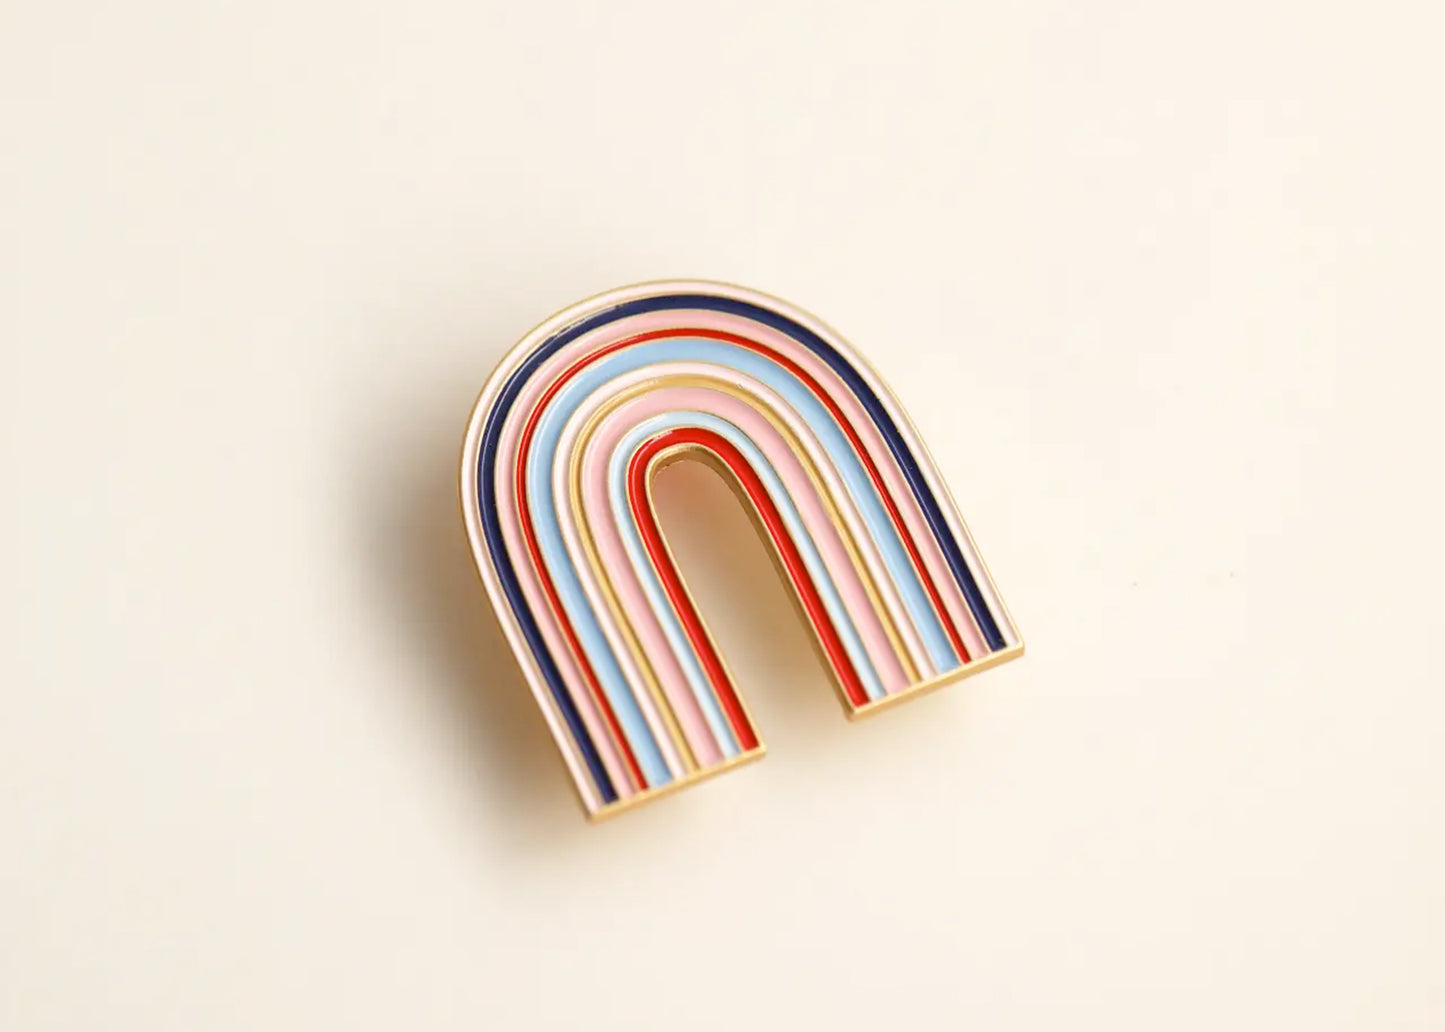 Lisa Chow Large Rainbow Enamel Pin in The Grand Budapest Hotel